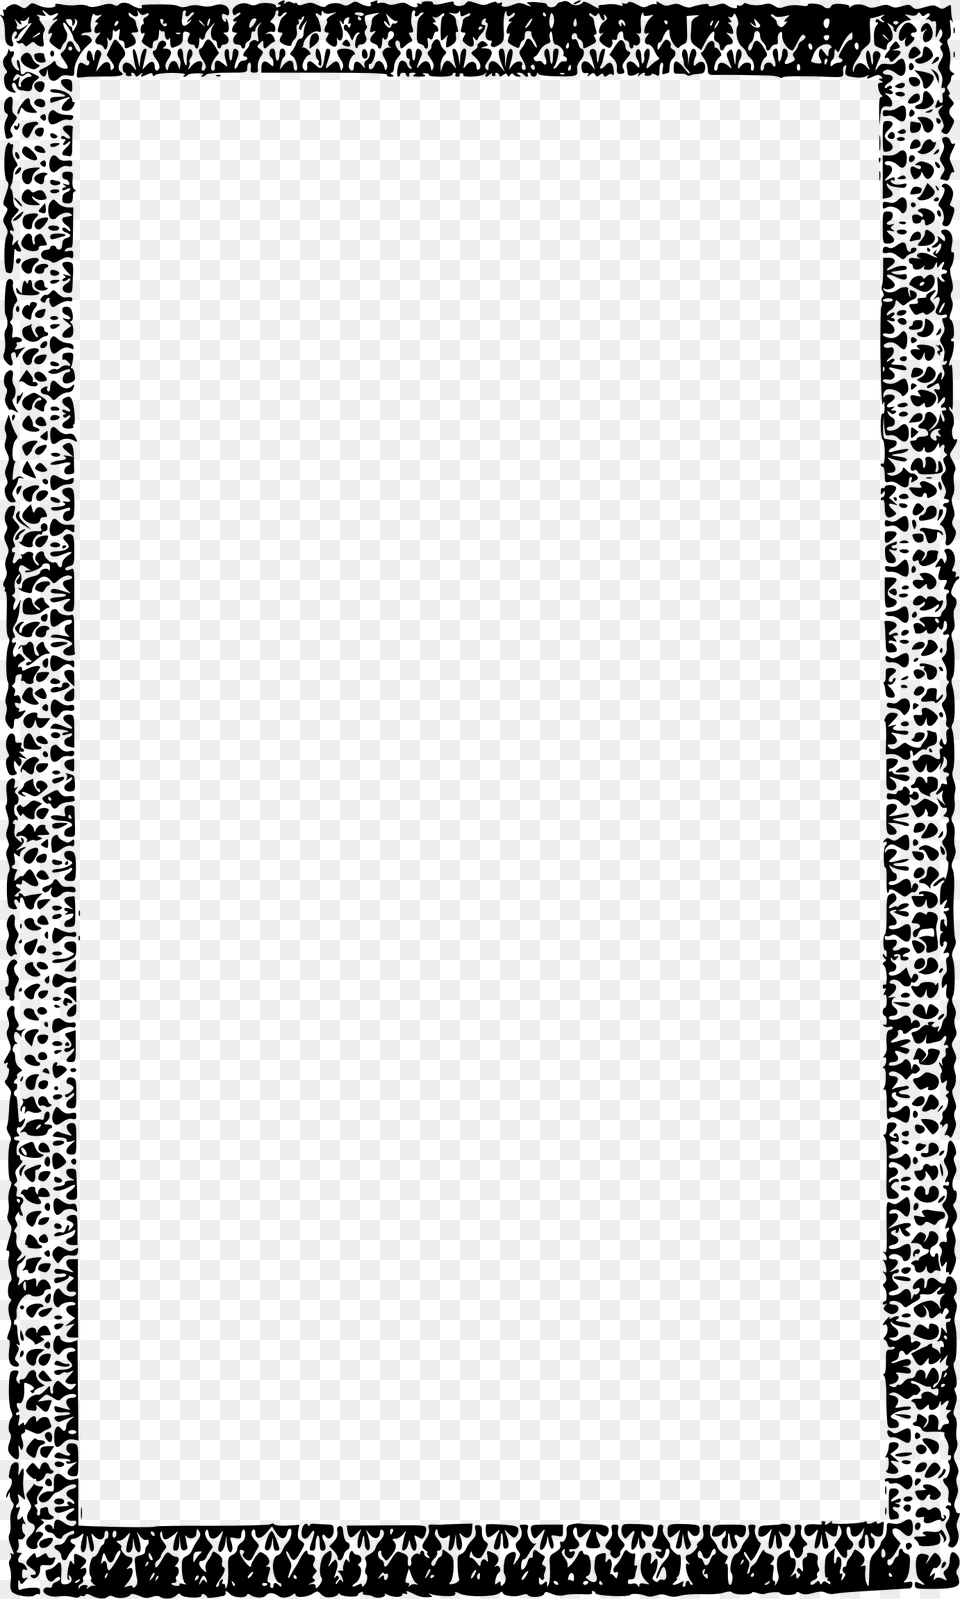 This Free Icons Design Of Deed Border Template, Gray Png